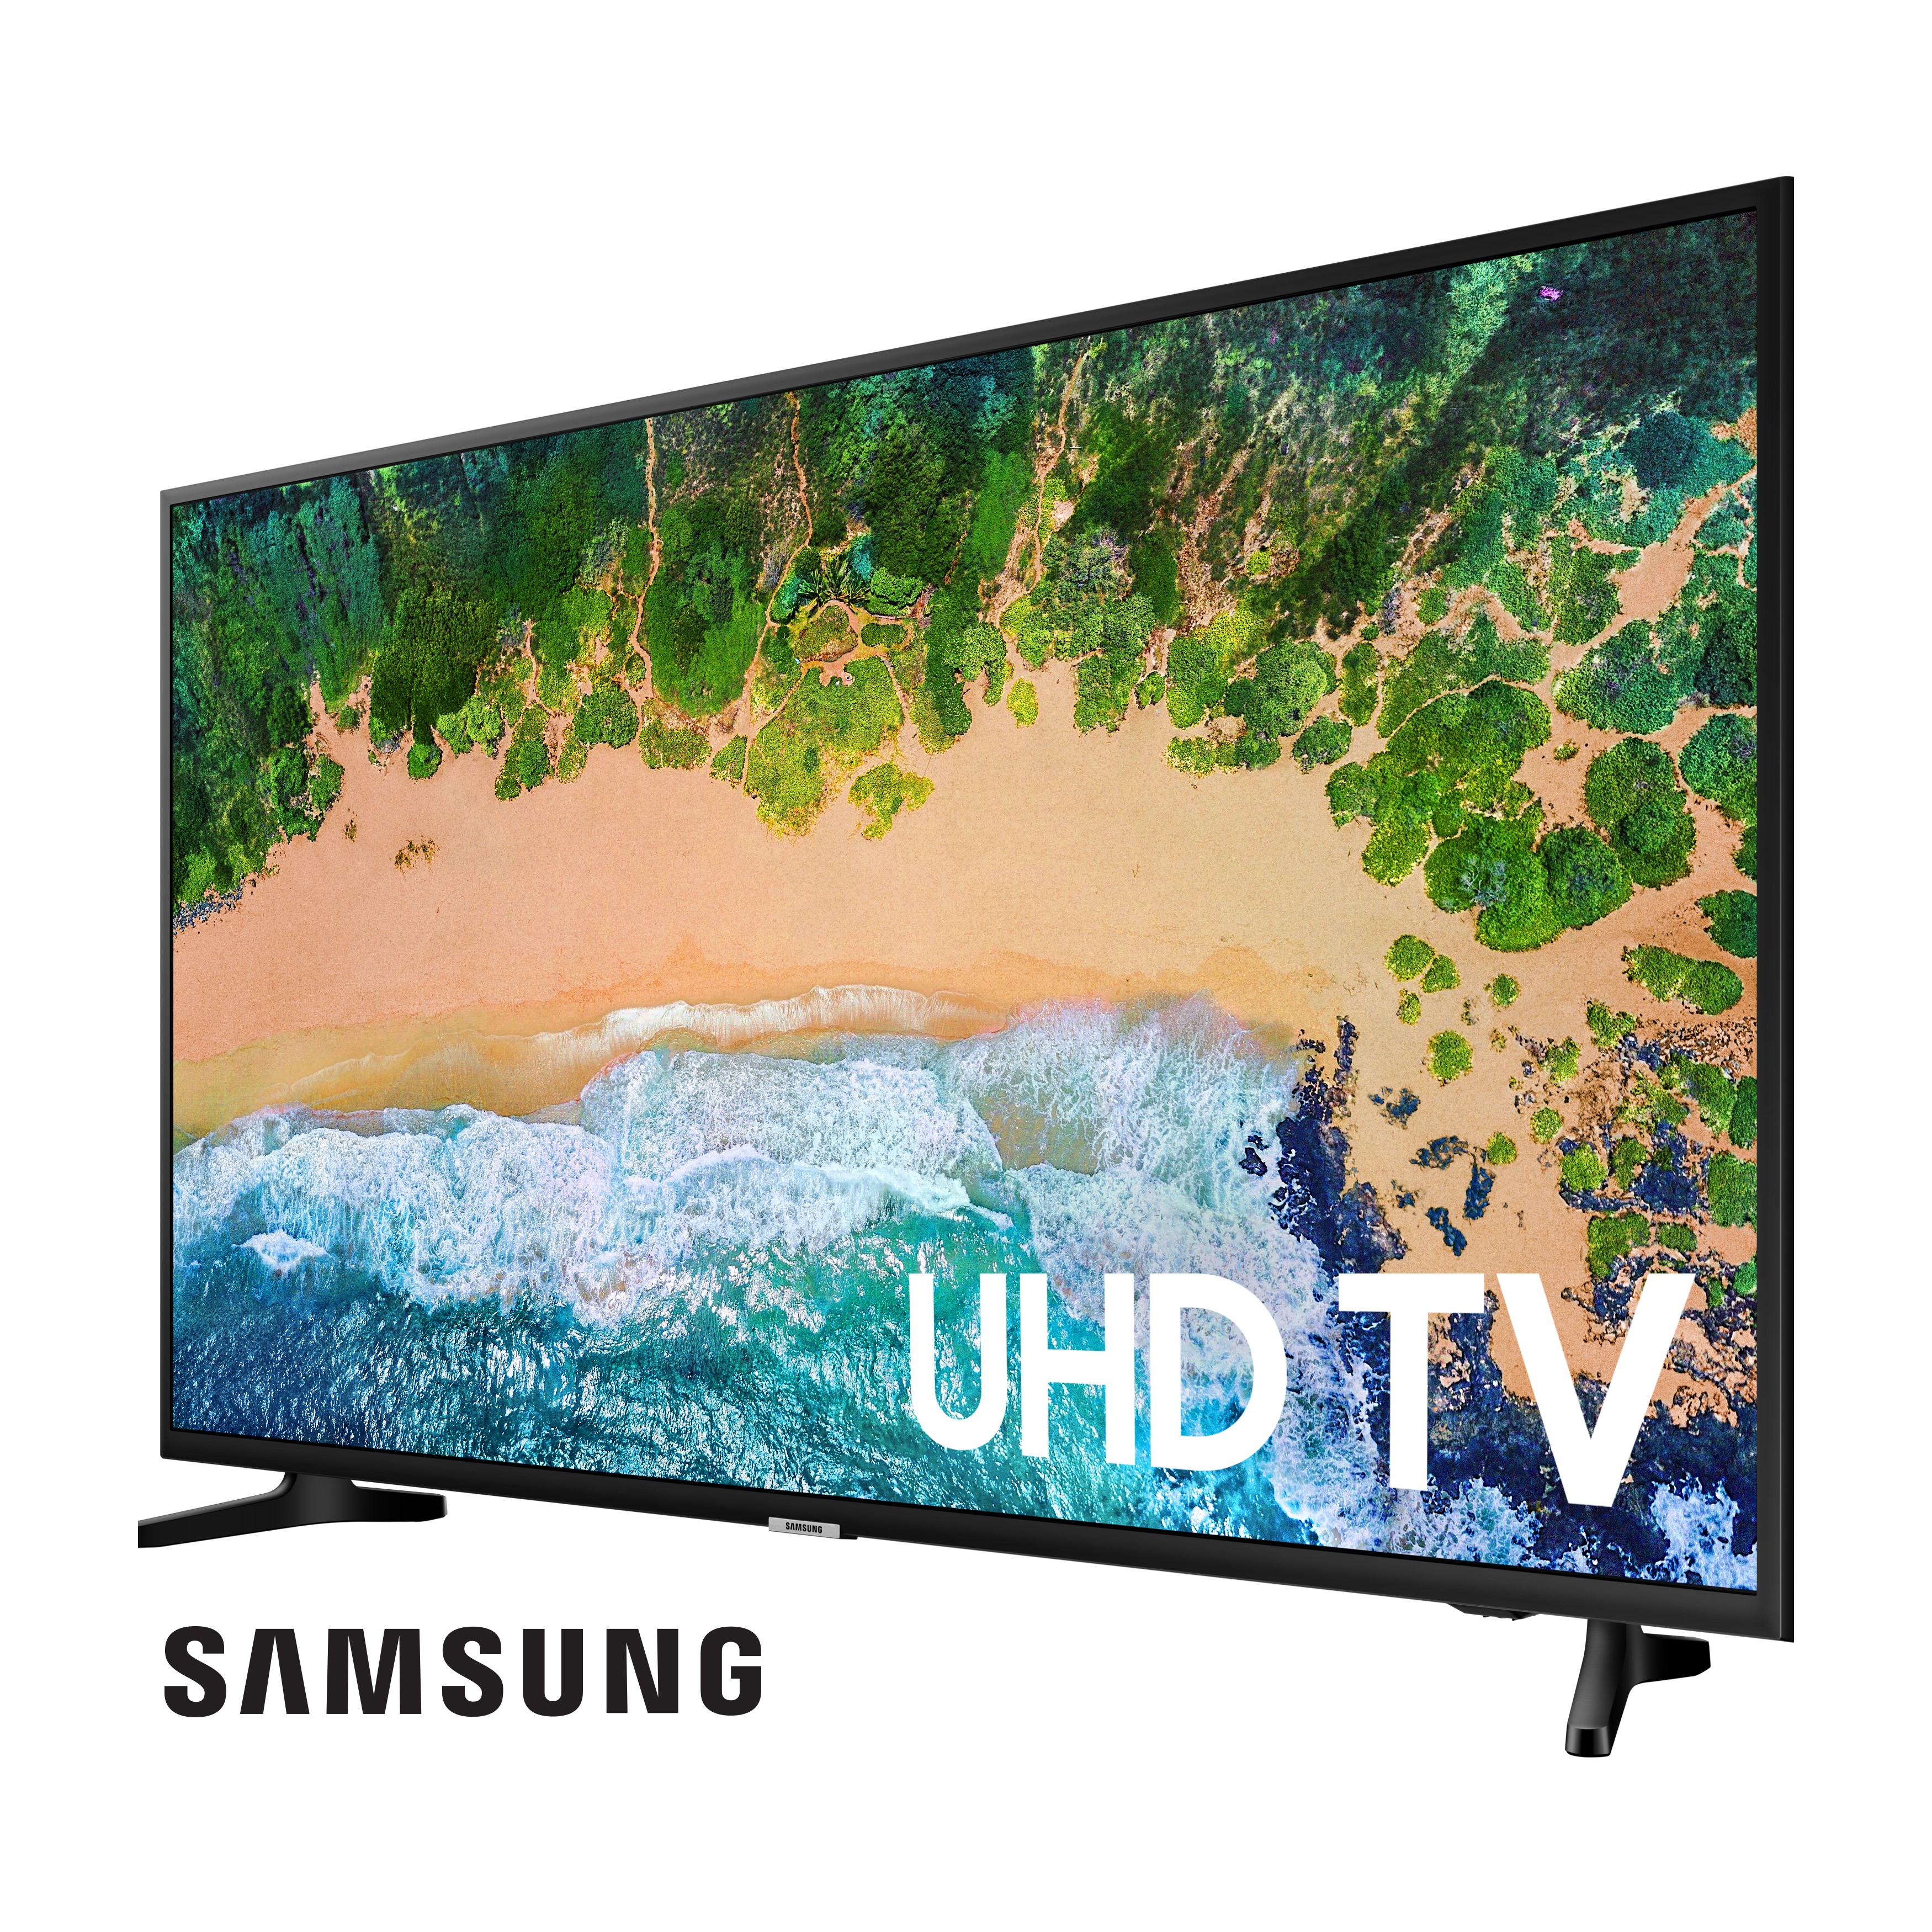 SAMSUNG 55" Class 4K UHD 2160p LED Smart TV with HDR UN55NU6900 - image 4 of 23